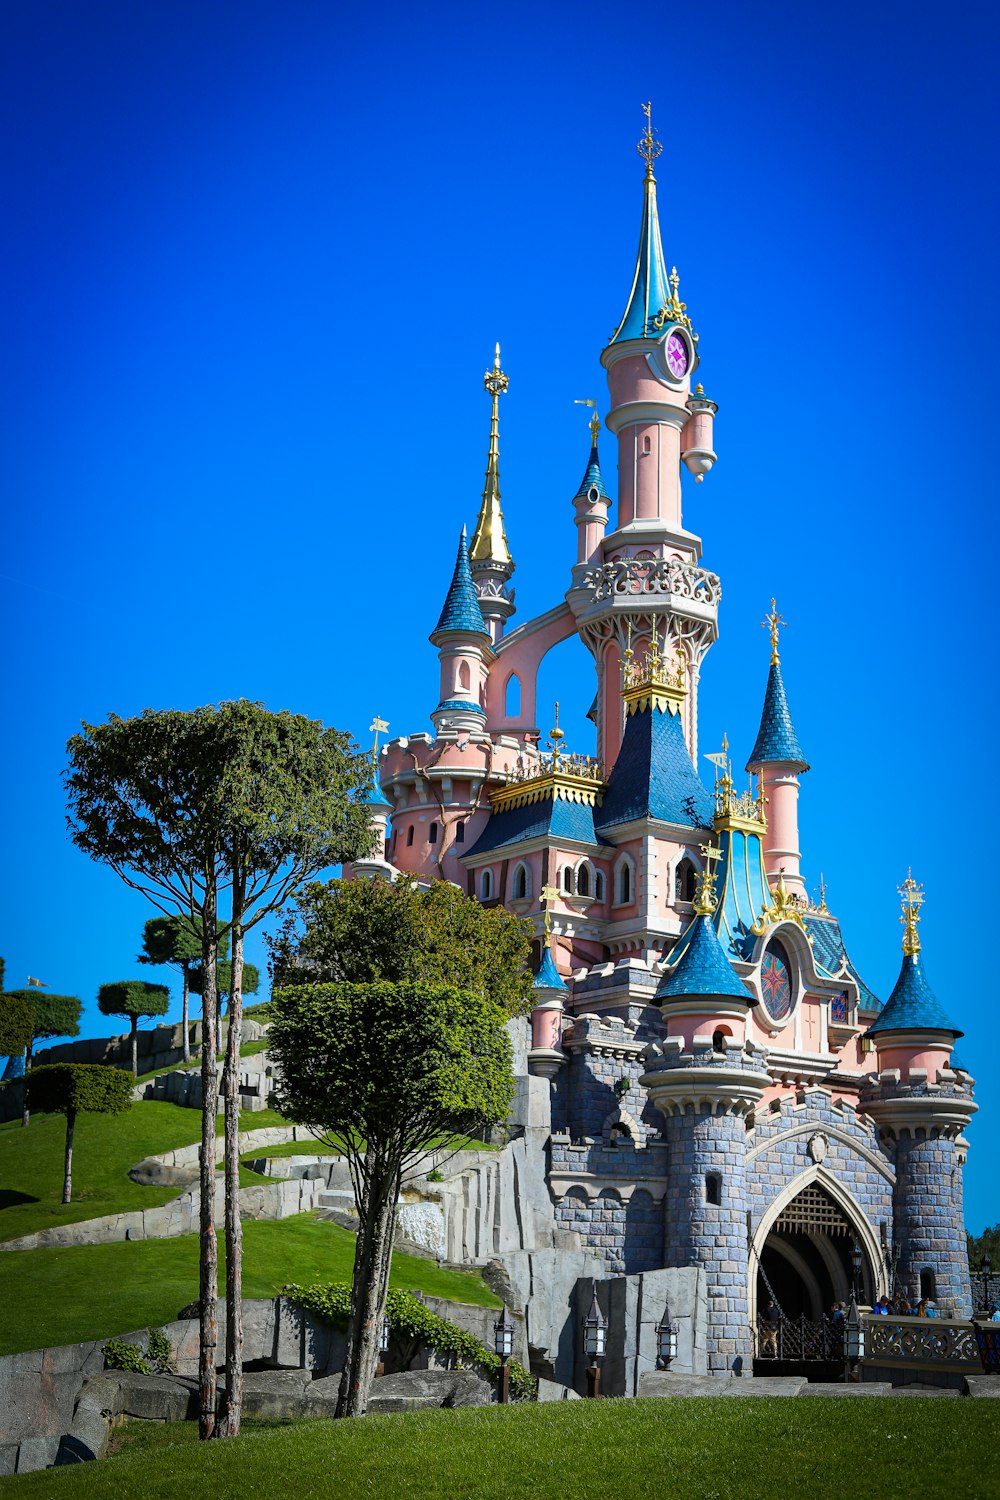 white and blue castle surrounded by green trees under blue sky during daytime